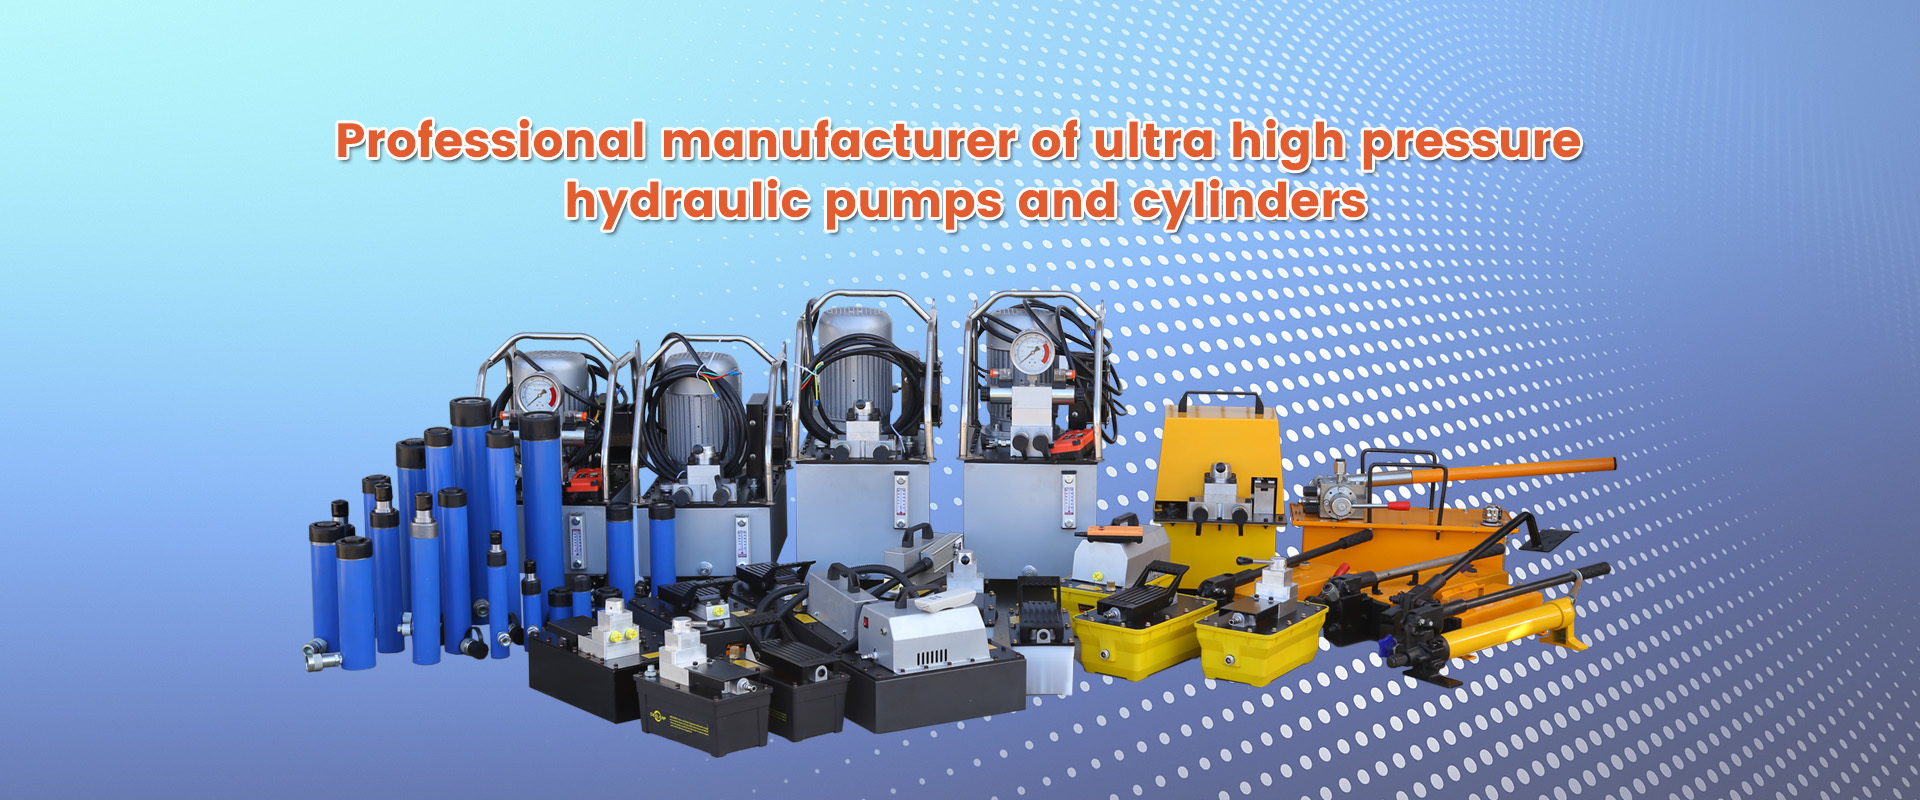 Professional manufacturer of ultra high pressure hydraulic pumps and cylinders